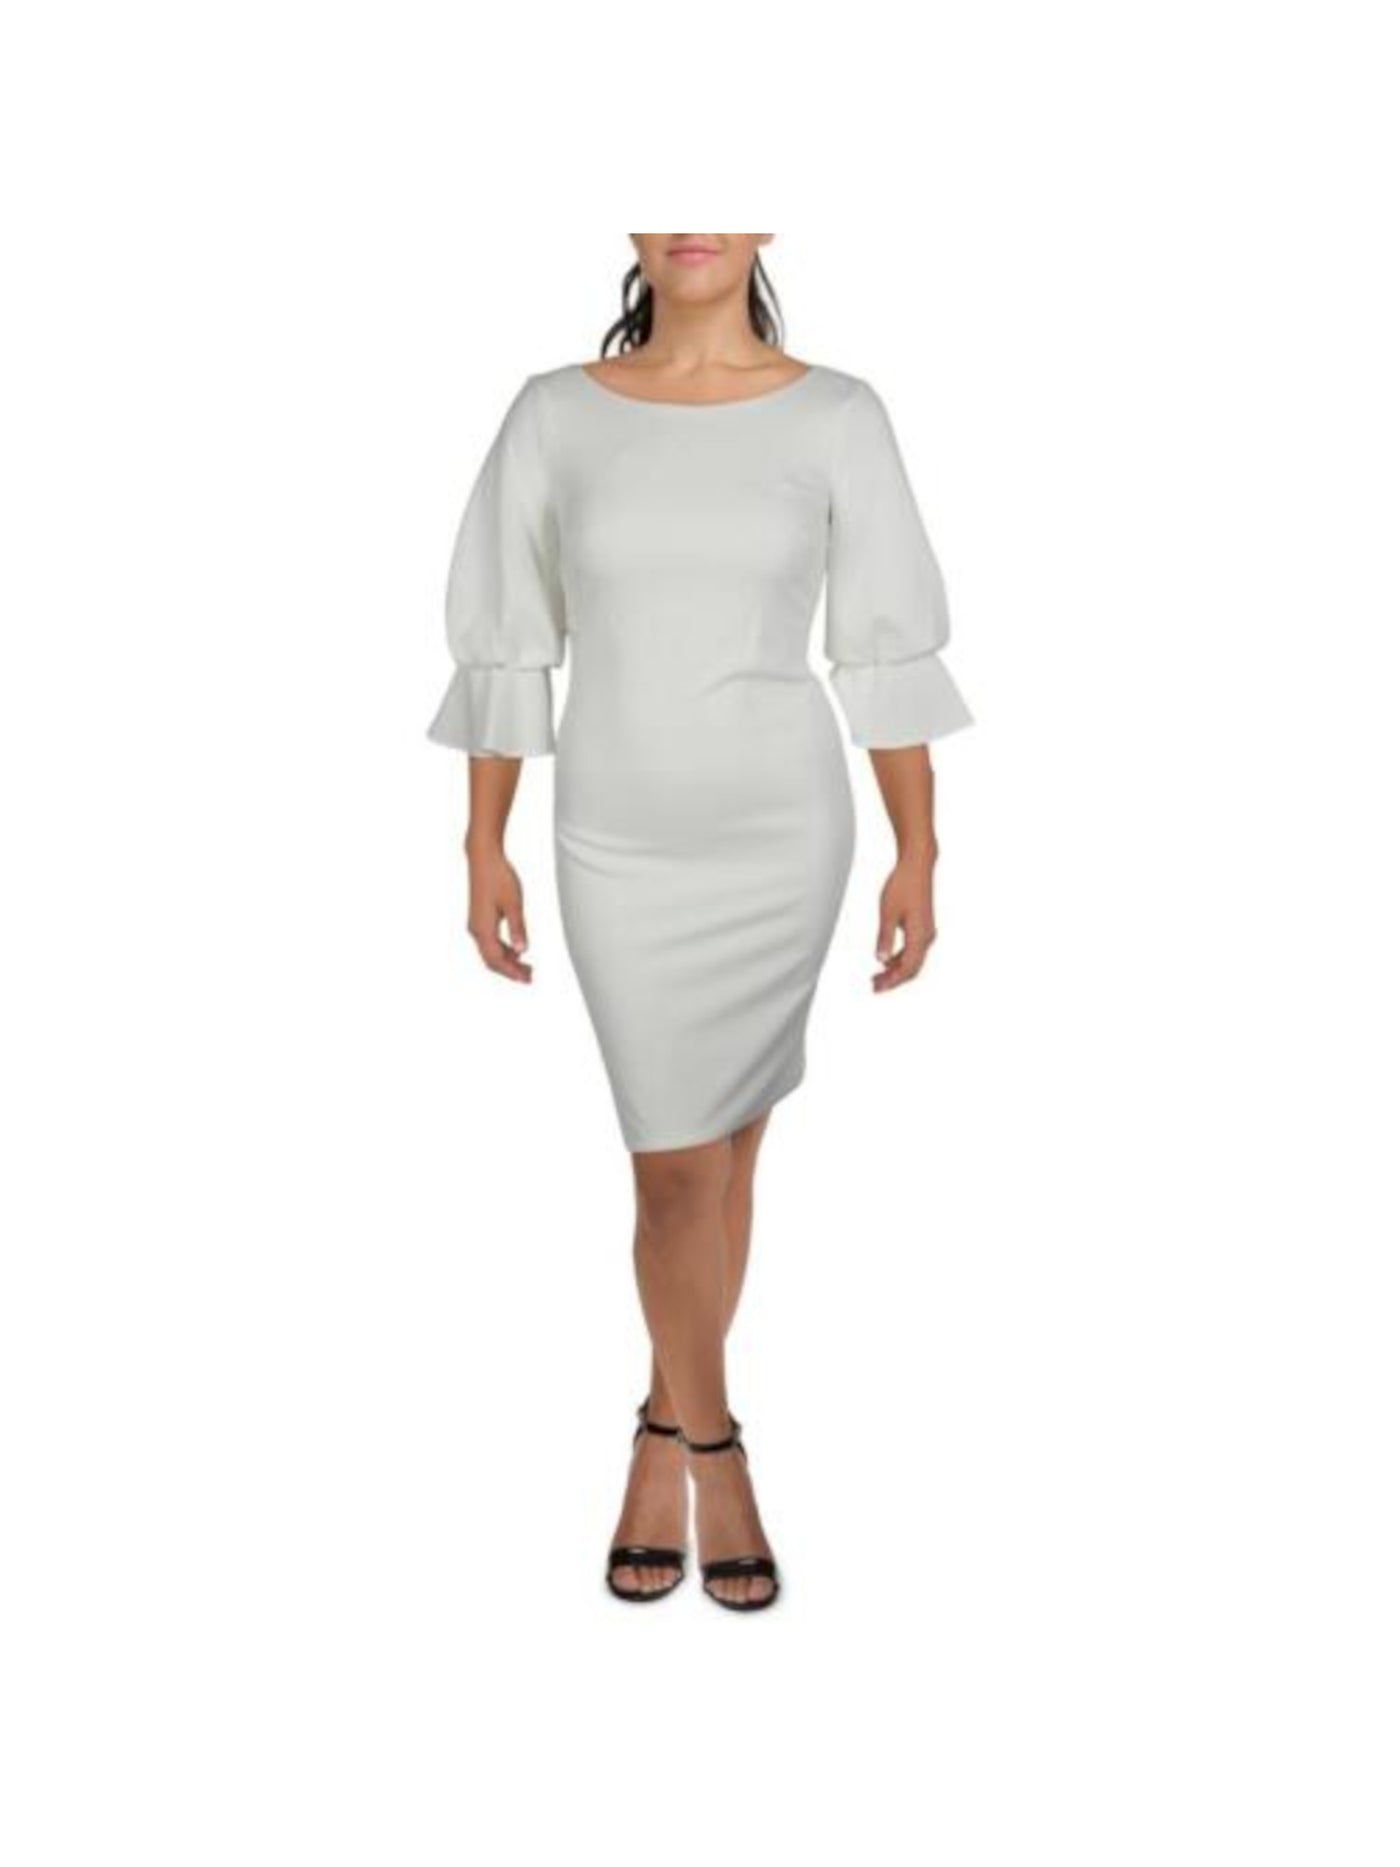 CALVIN KLEIN Womens White Zippered Lined V-back Bell Sleeve Round Neck Above The Knee Cocktail Sheath Dress 4